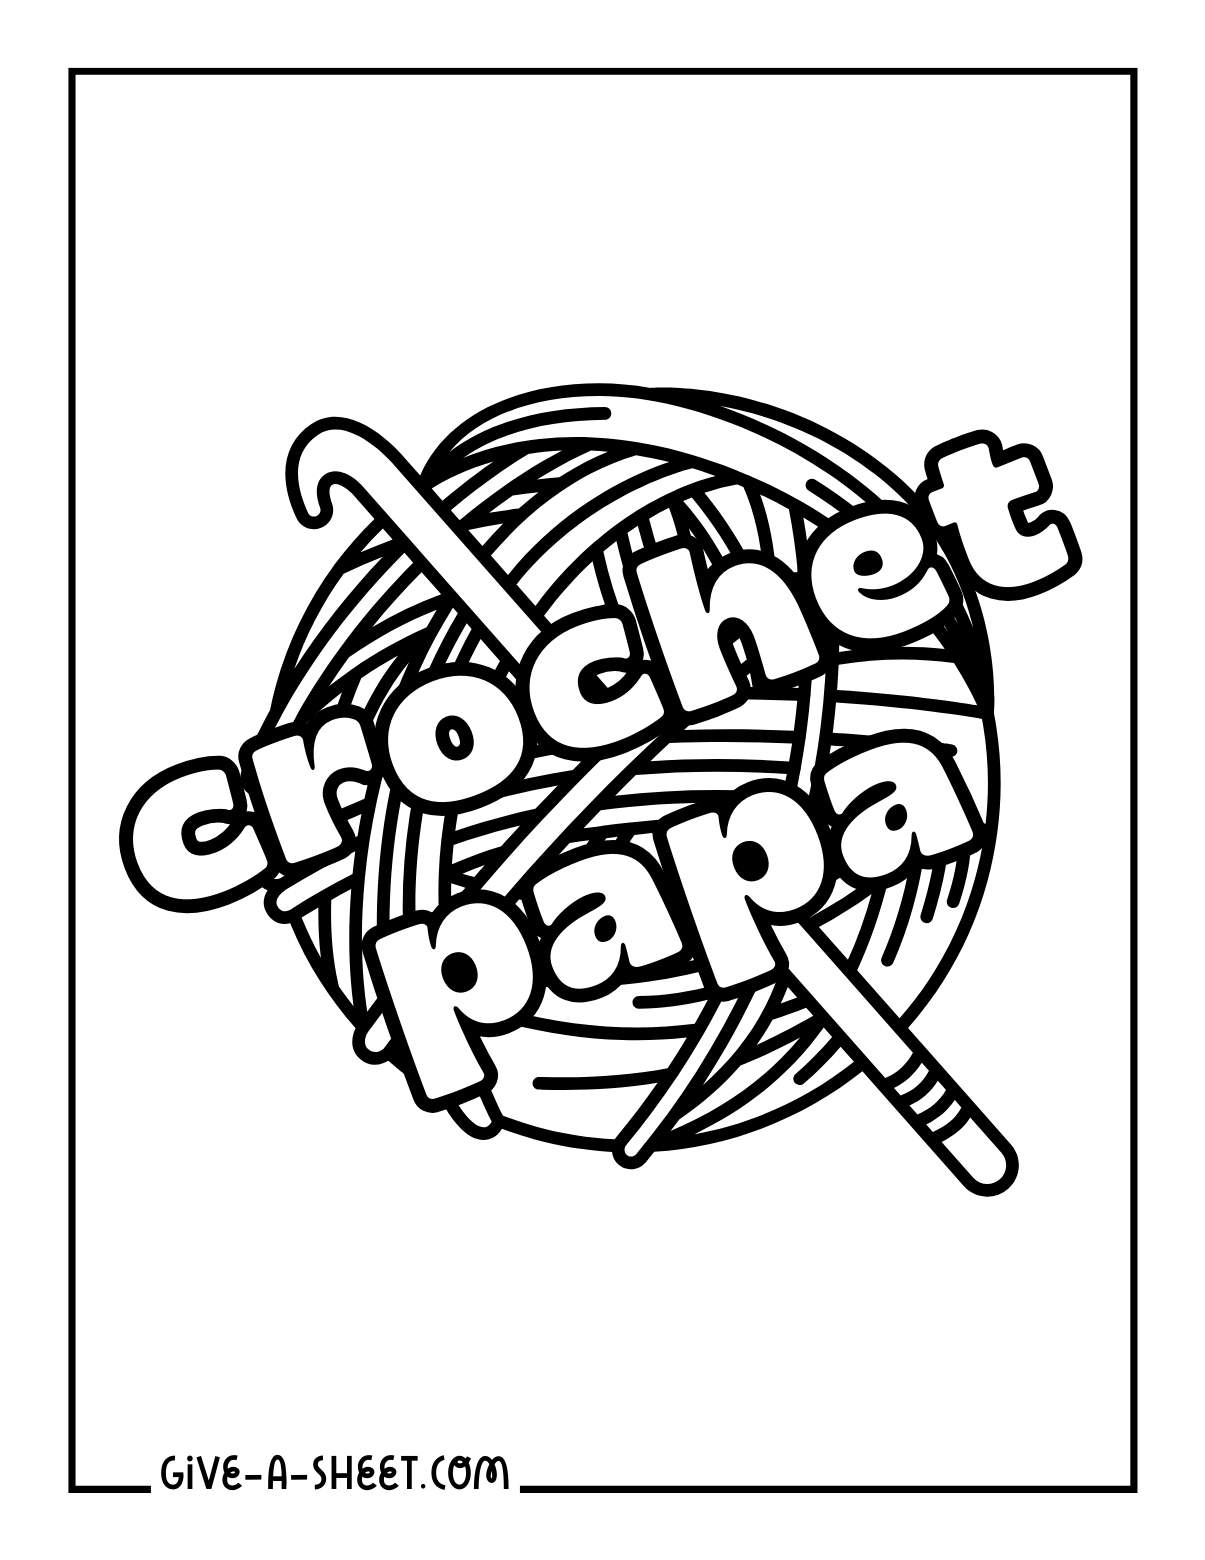 Crochet tapestry needle and yarn coloring page for men.